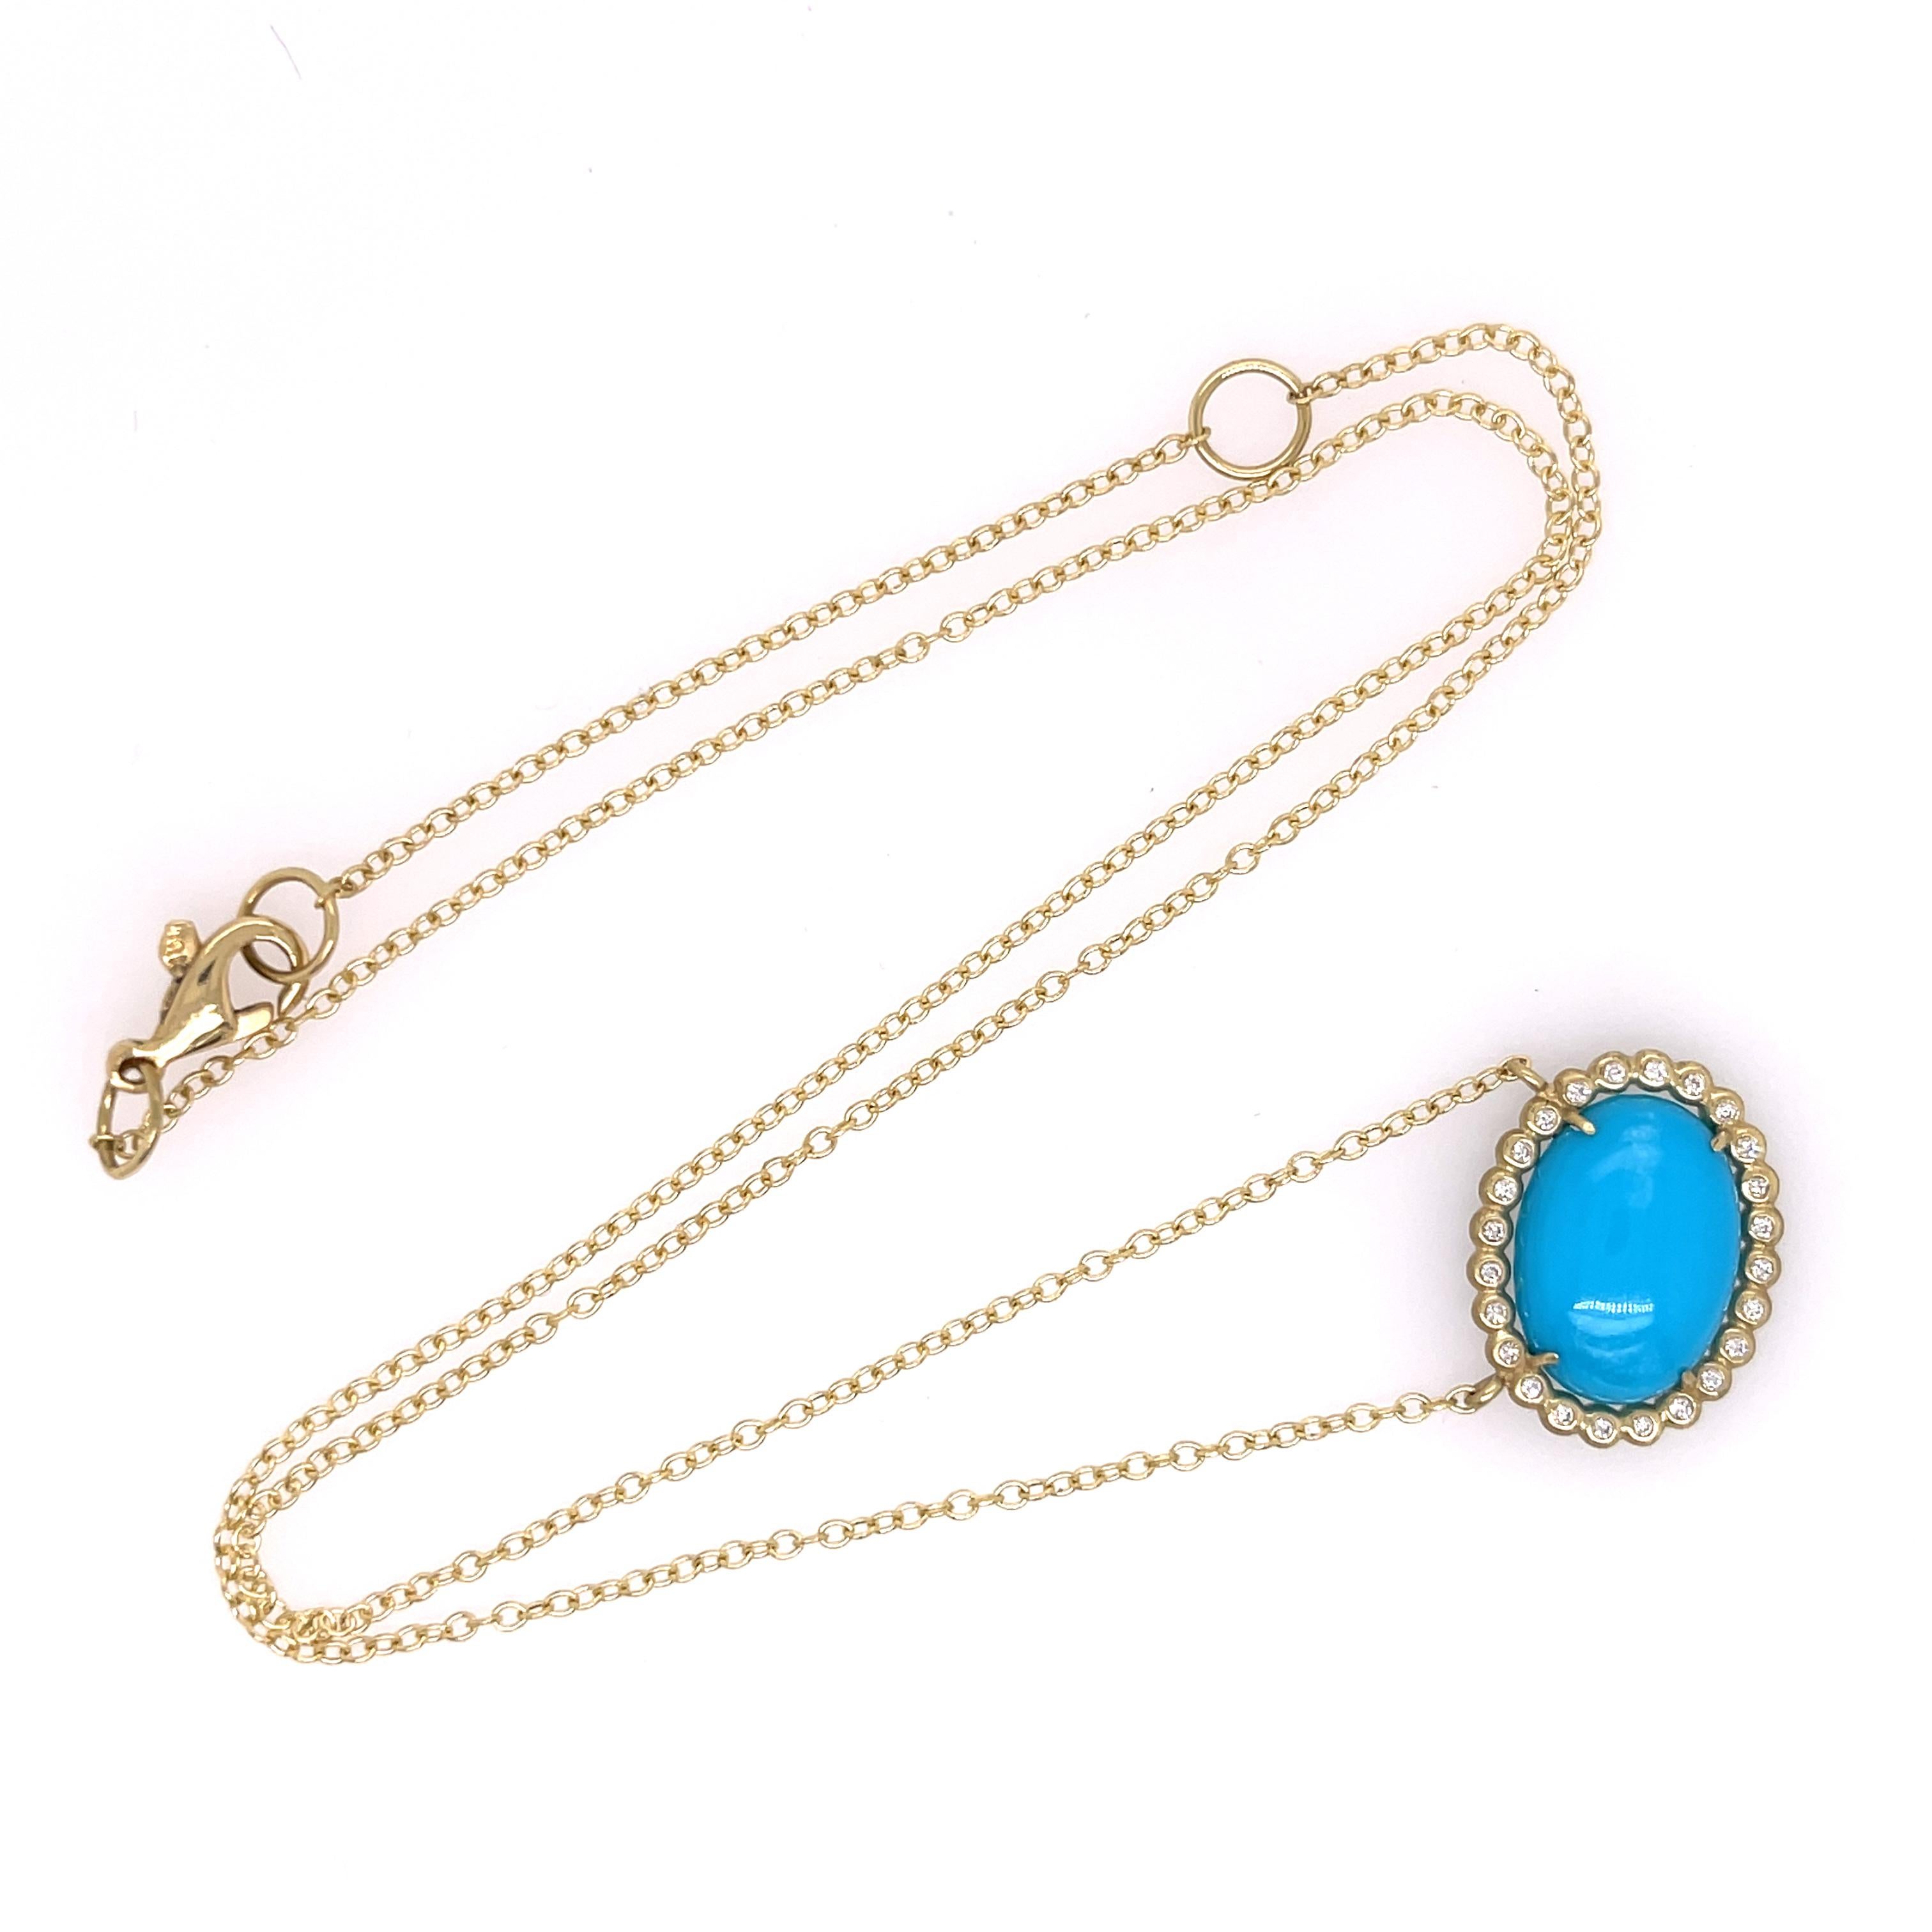 18K yellow gold necklace featuring sleeping beauty turquoise and brilliant round diamonds by designer Suzy Landa. The chain can go from 18